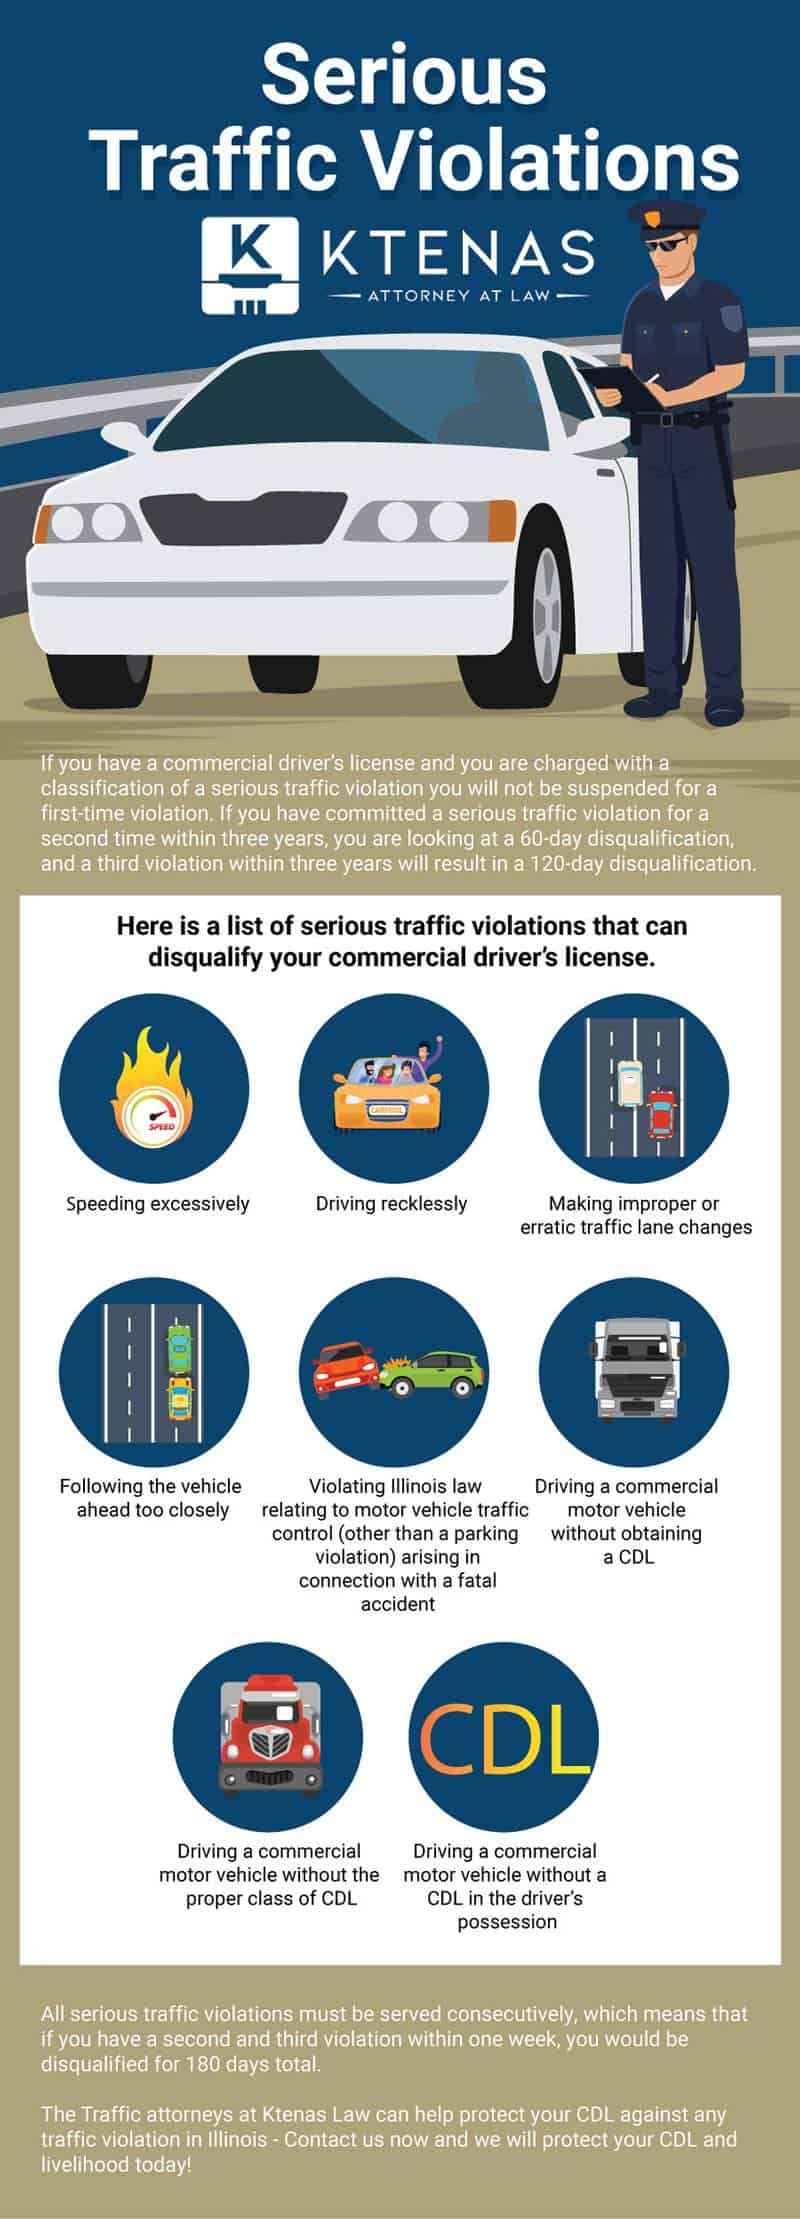 Serious Traffic Violations in Illinois - Infographic